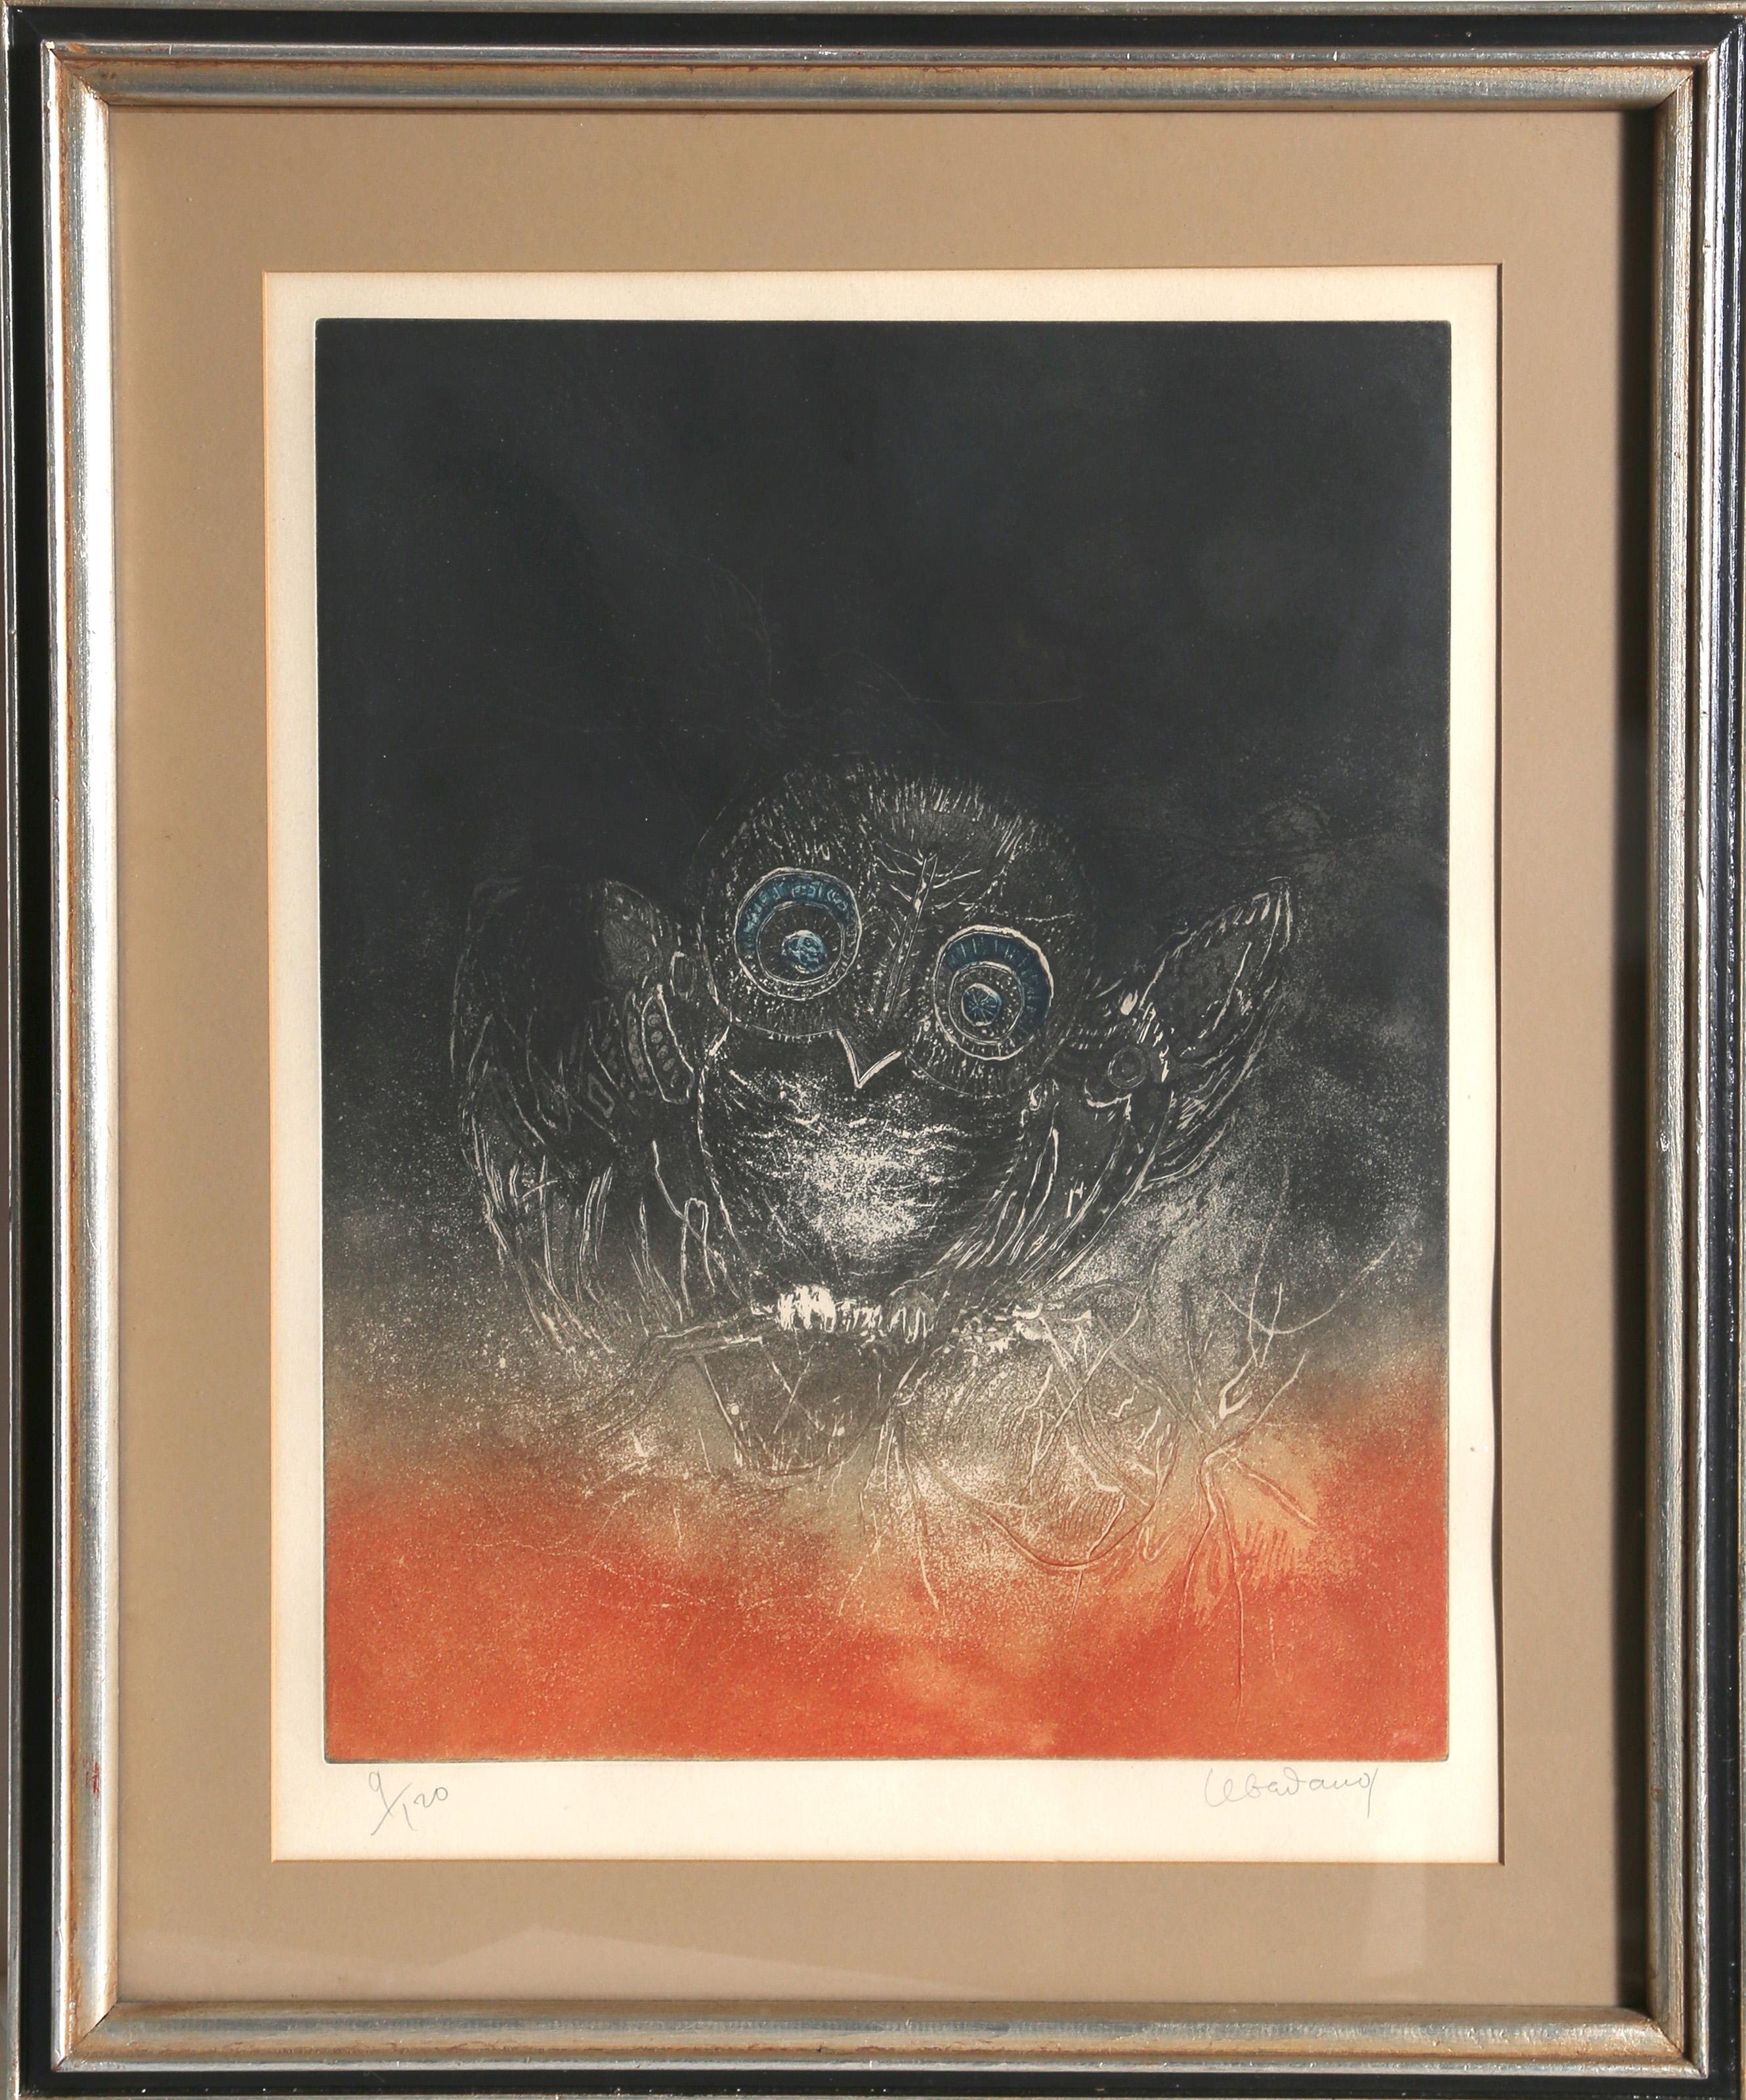 Lebadang (aka Hoi), Vietnamese (1922 - 2015) -  Owl. Year: circa 1975, Medium: Aquatint Etching, signed and numbered in pencil, Edition: 9/120, Image Size: 22.5 x 17.5 inches, Frame Size: 32.5 x 27 inches, Description: This charming etching of an